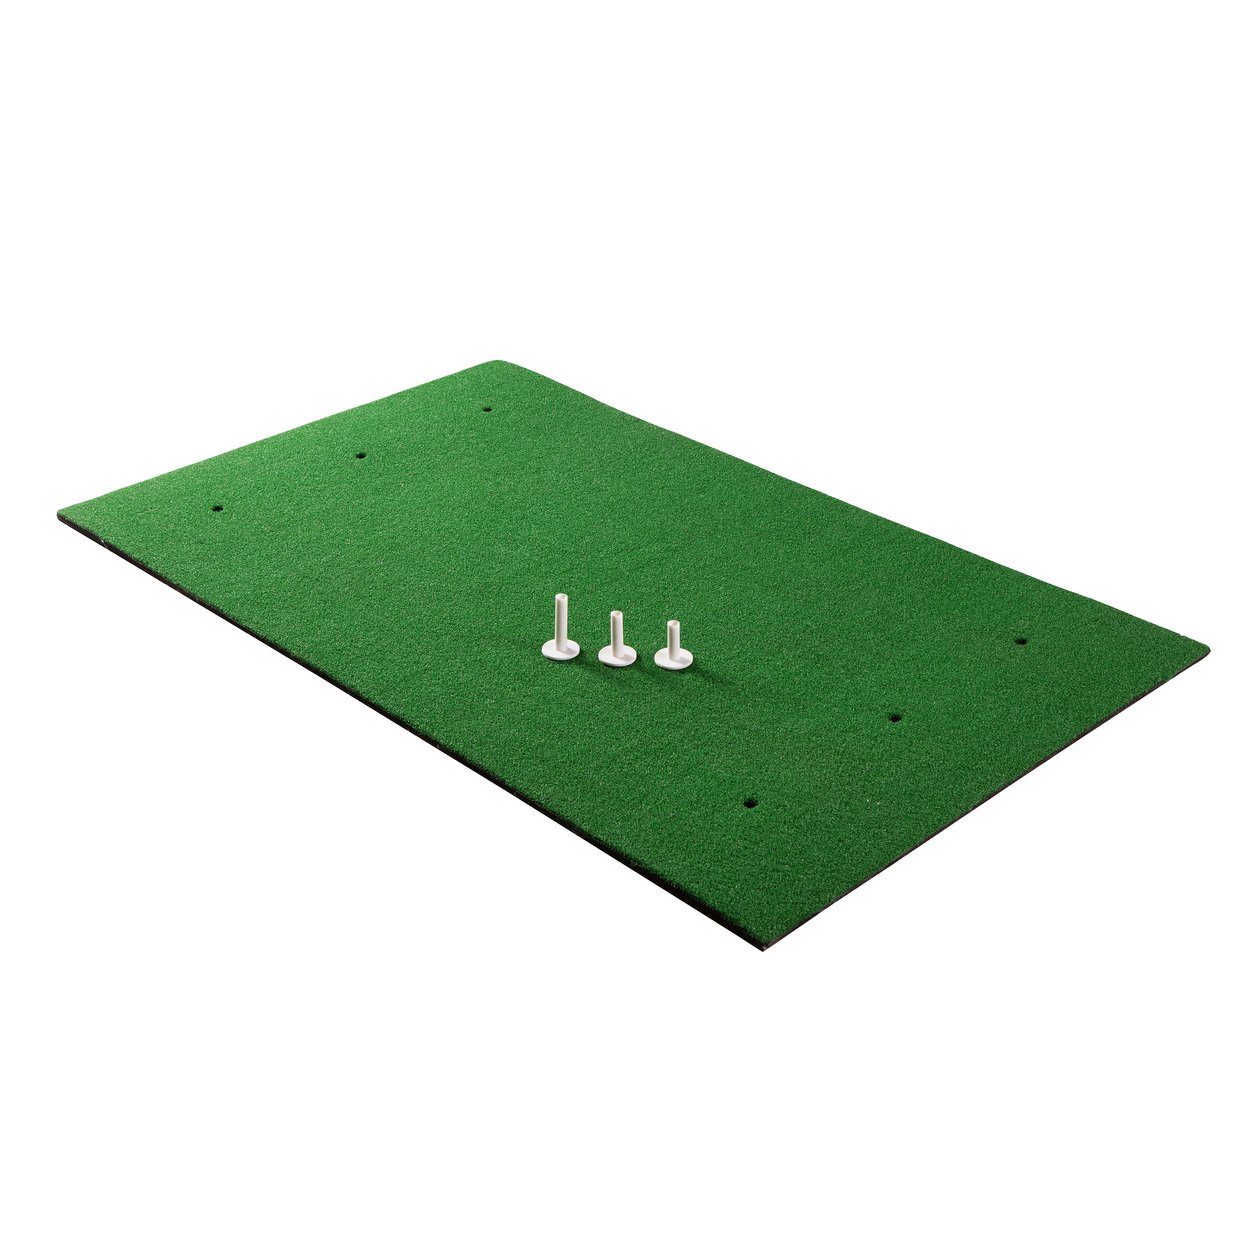 Golf Practice Hitting Mat 3 X 5 Ft Artificial Turf Training Mat With 3 Rubber Tees